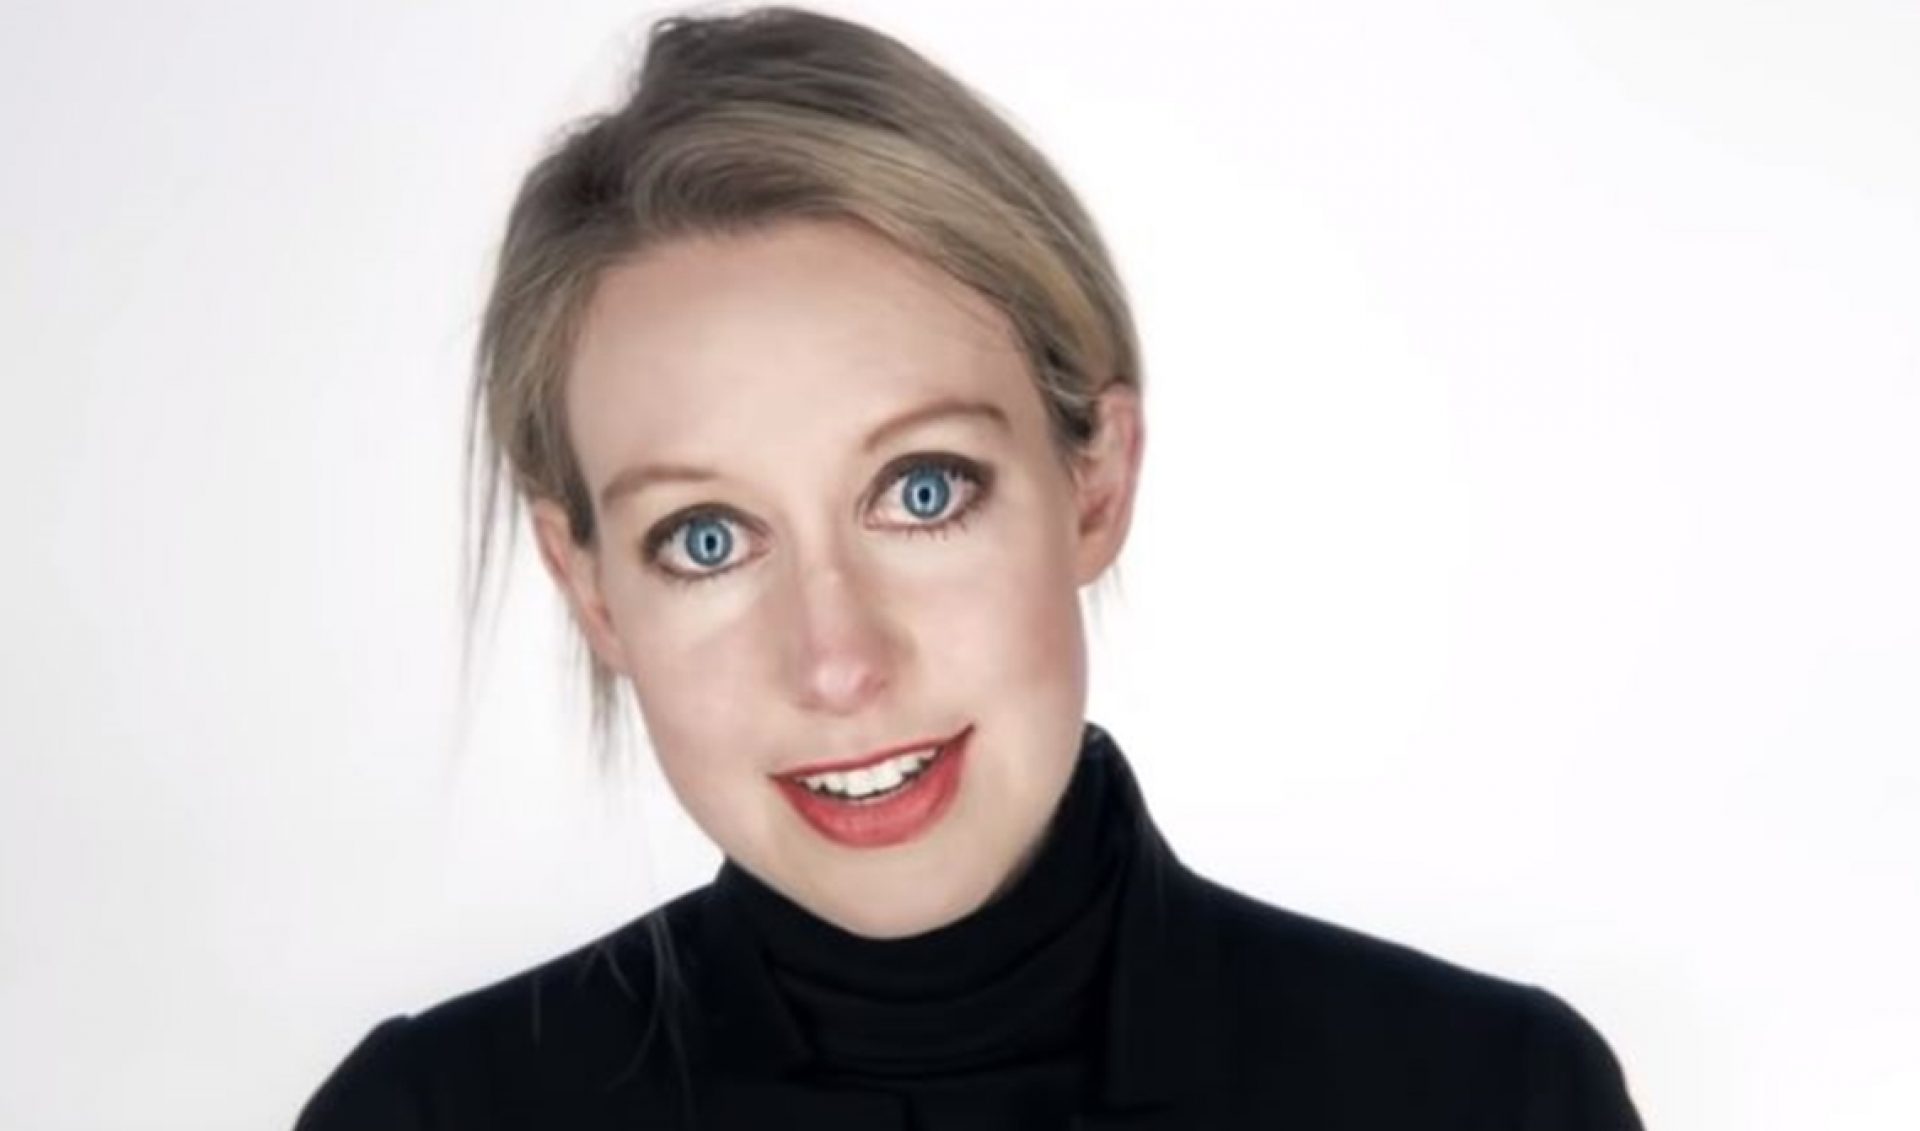 Hulu Orders Limited Series Based On Disgraced Theranos Founder, Starring Kate McKinnon